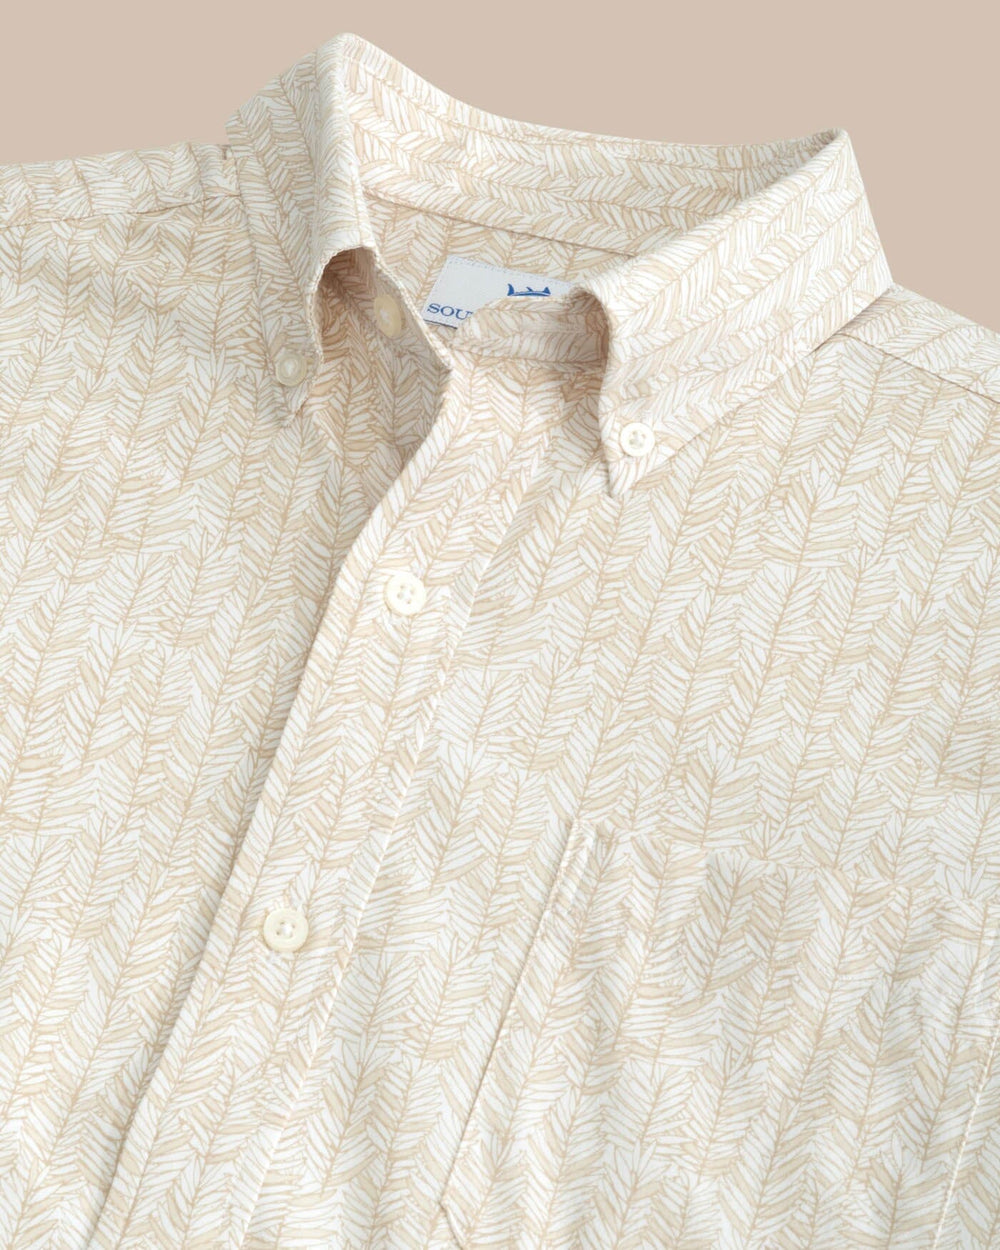 The detail view of the Southern Tide Leagally Frond Intercoastal Short Sleeve Sport Shirt by Southern Tide - Whitecap Khaki